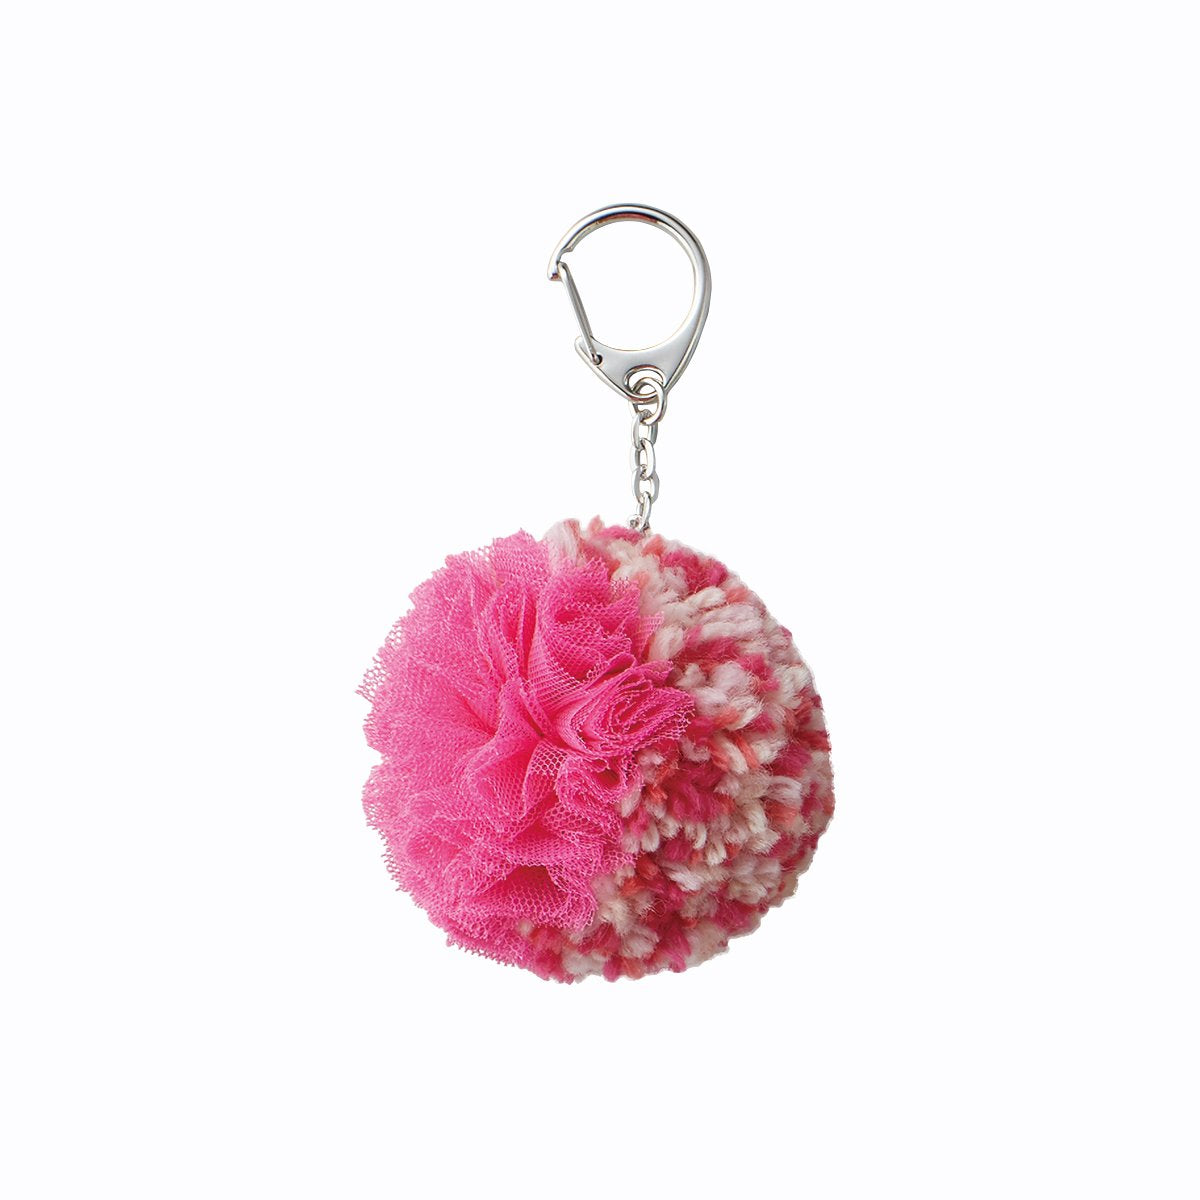 — Clover Pom Pom makers, Large and Small